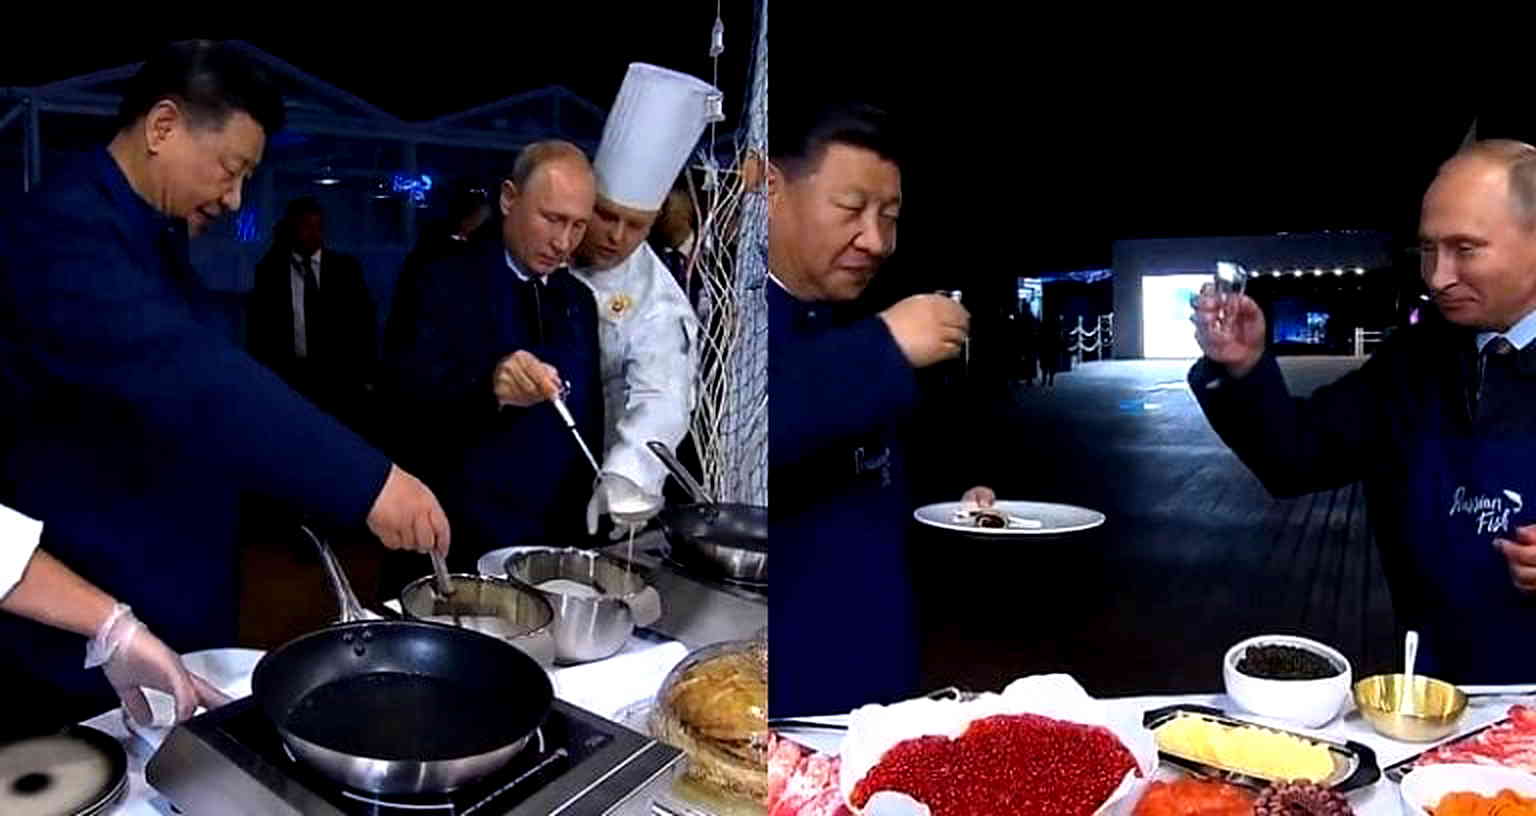 Vladimir Putin and Xi Jinping Solidify Bromance By Cooking Russian Pancakes With Caviar